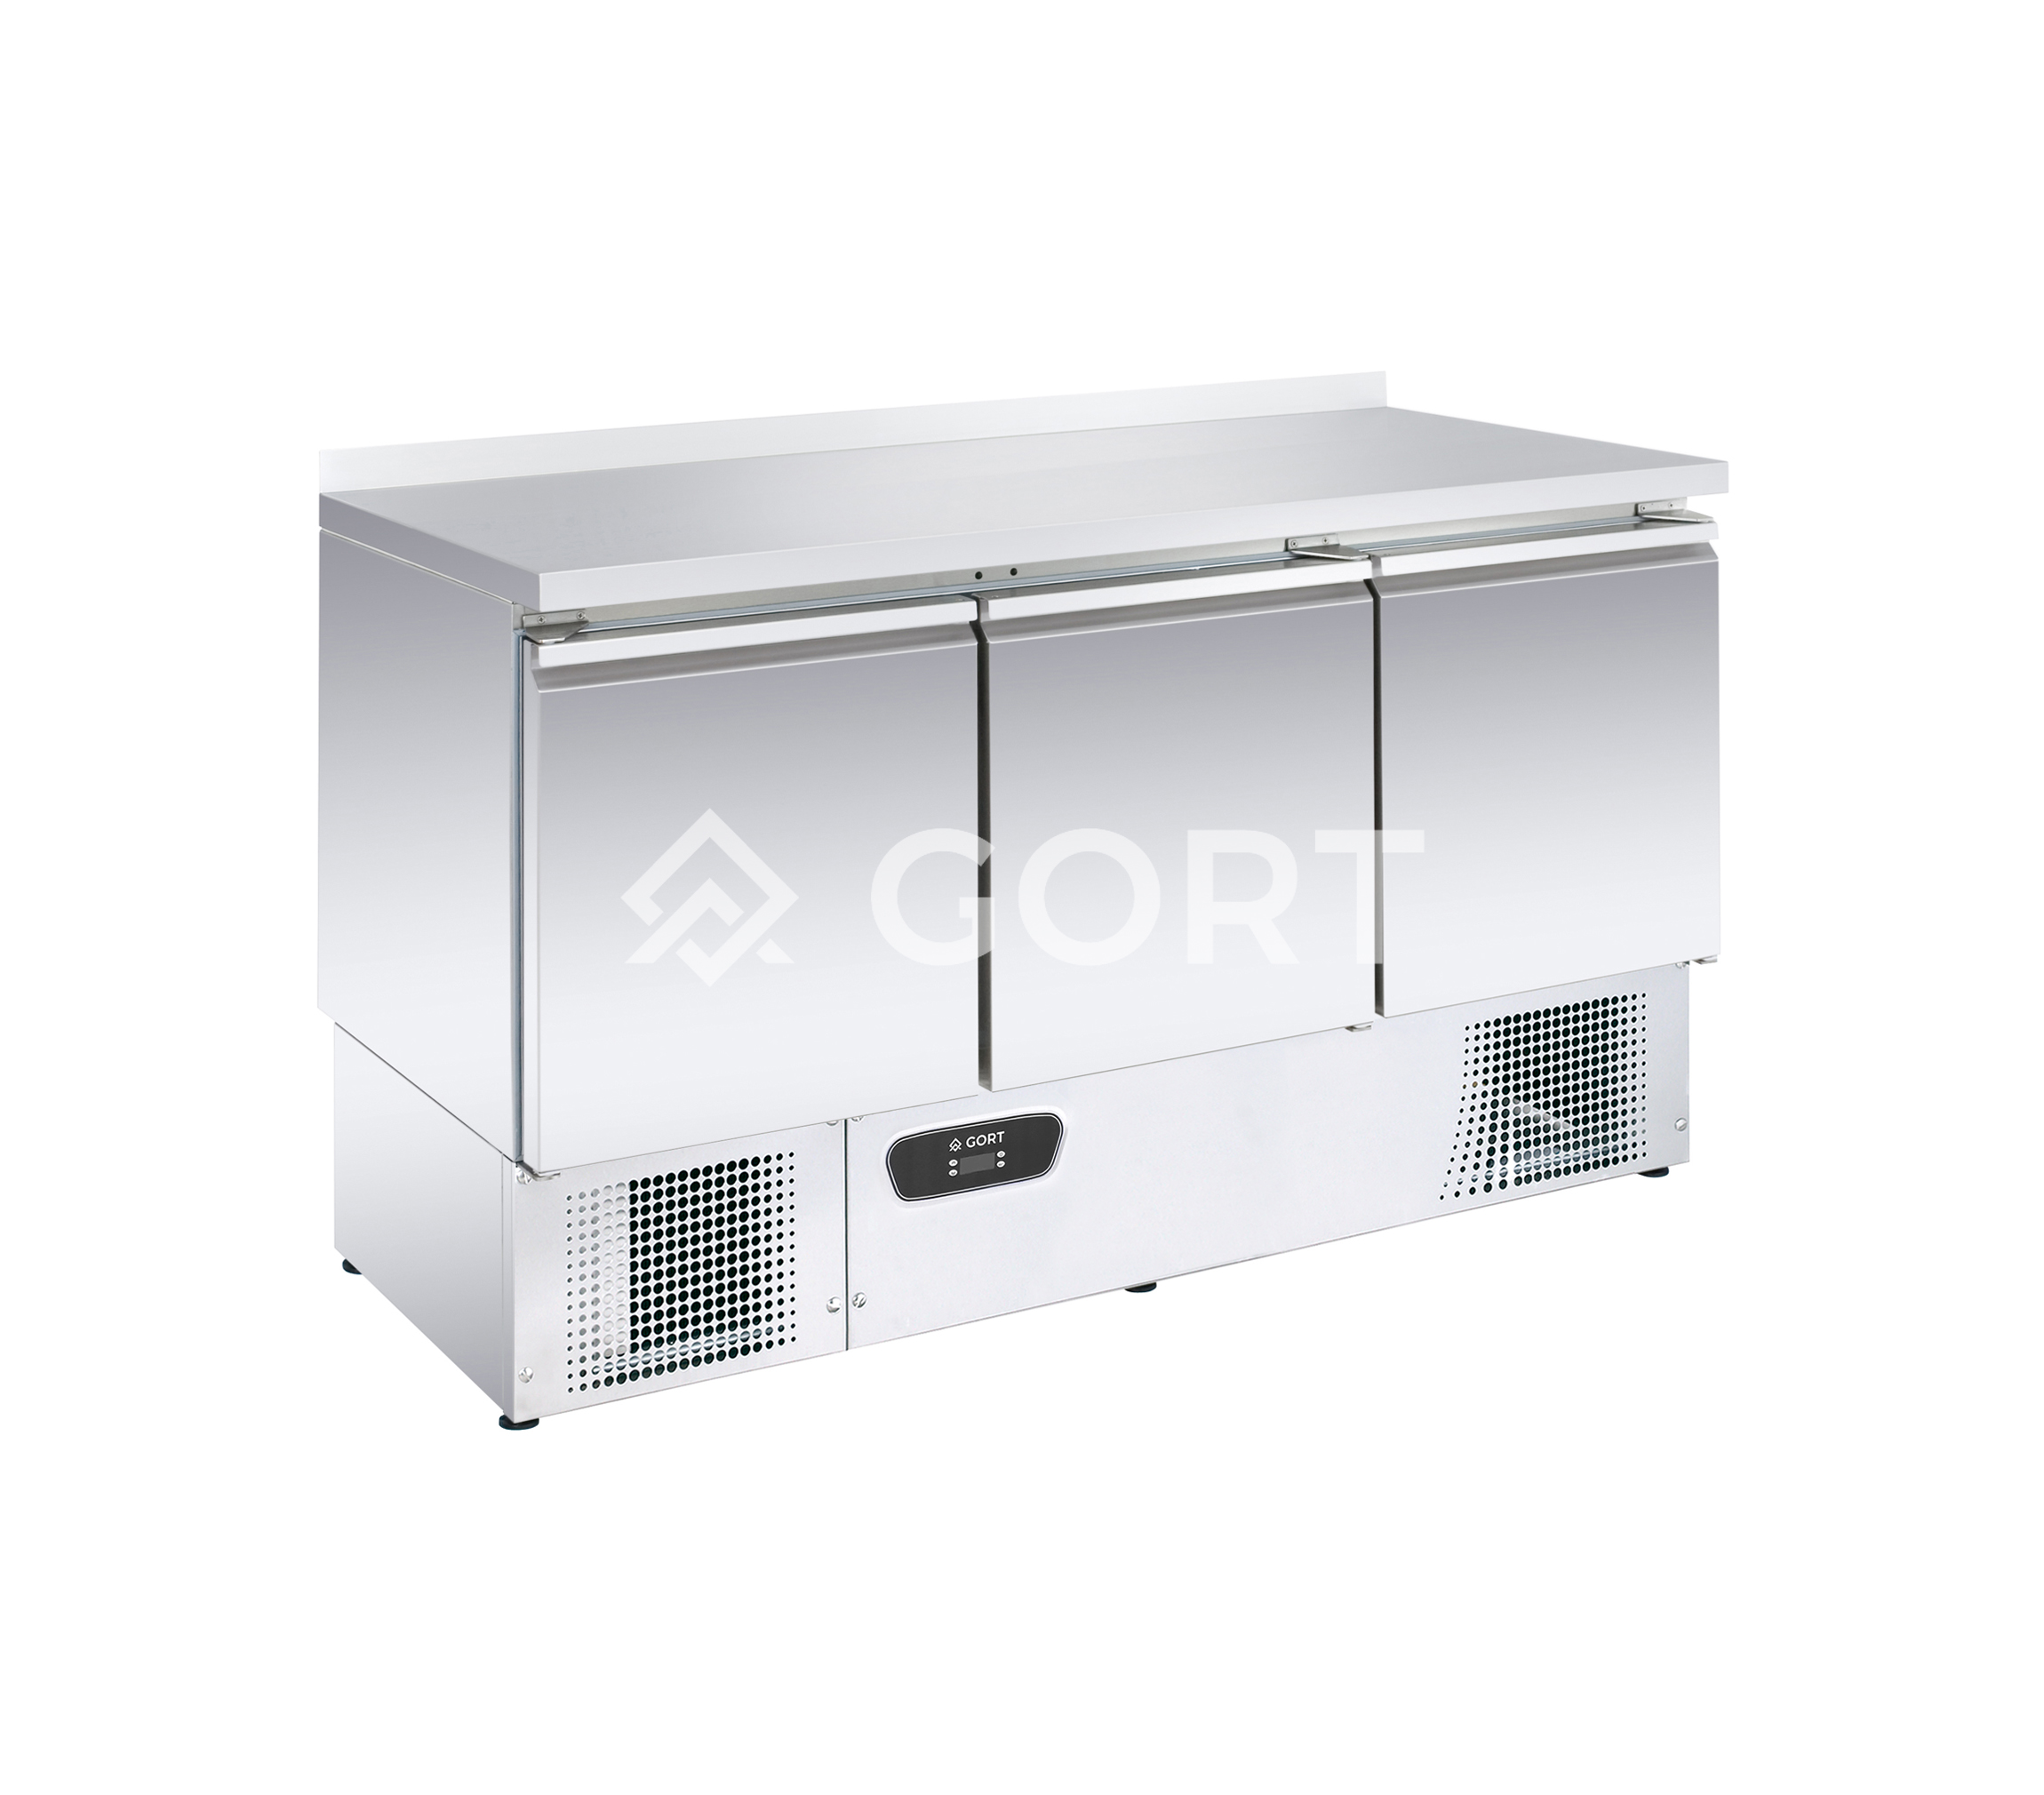 3 door refrigerated counter GN1/1 with compressor at the bottom